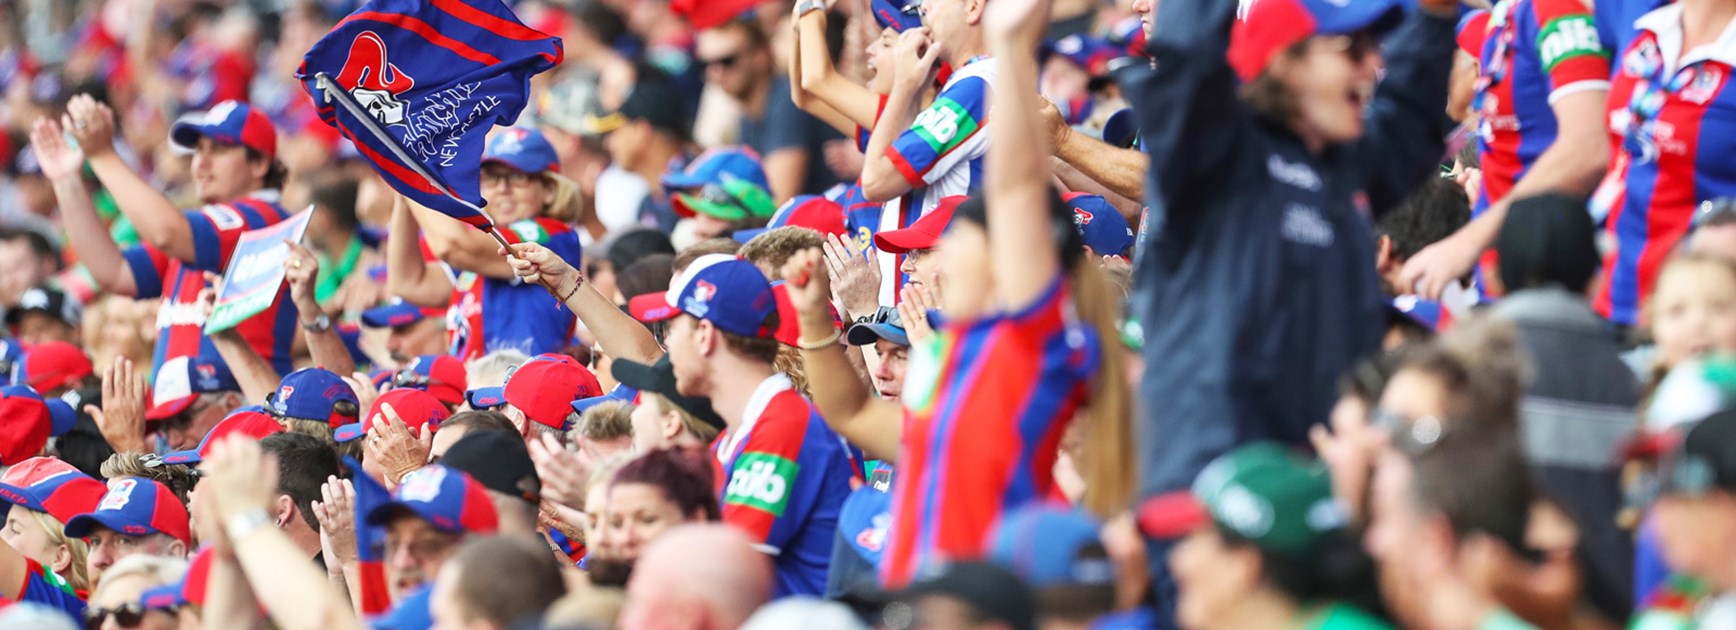 The Newcastle Knights have been blessed with fantastic support from their fans this season.